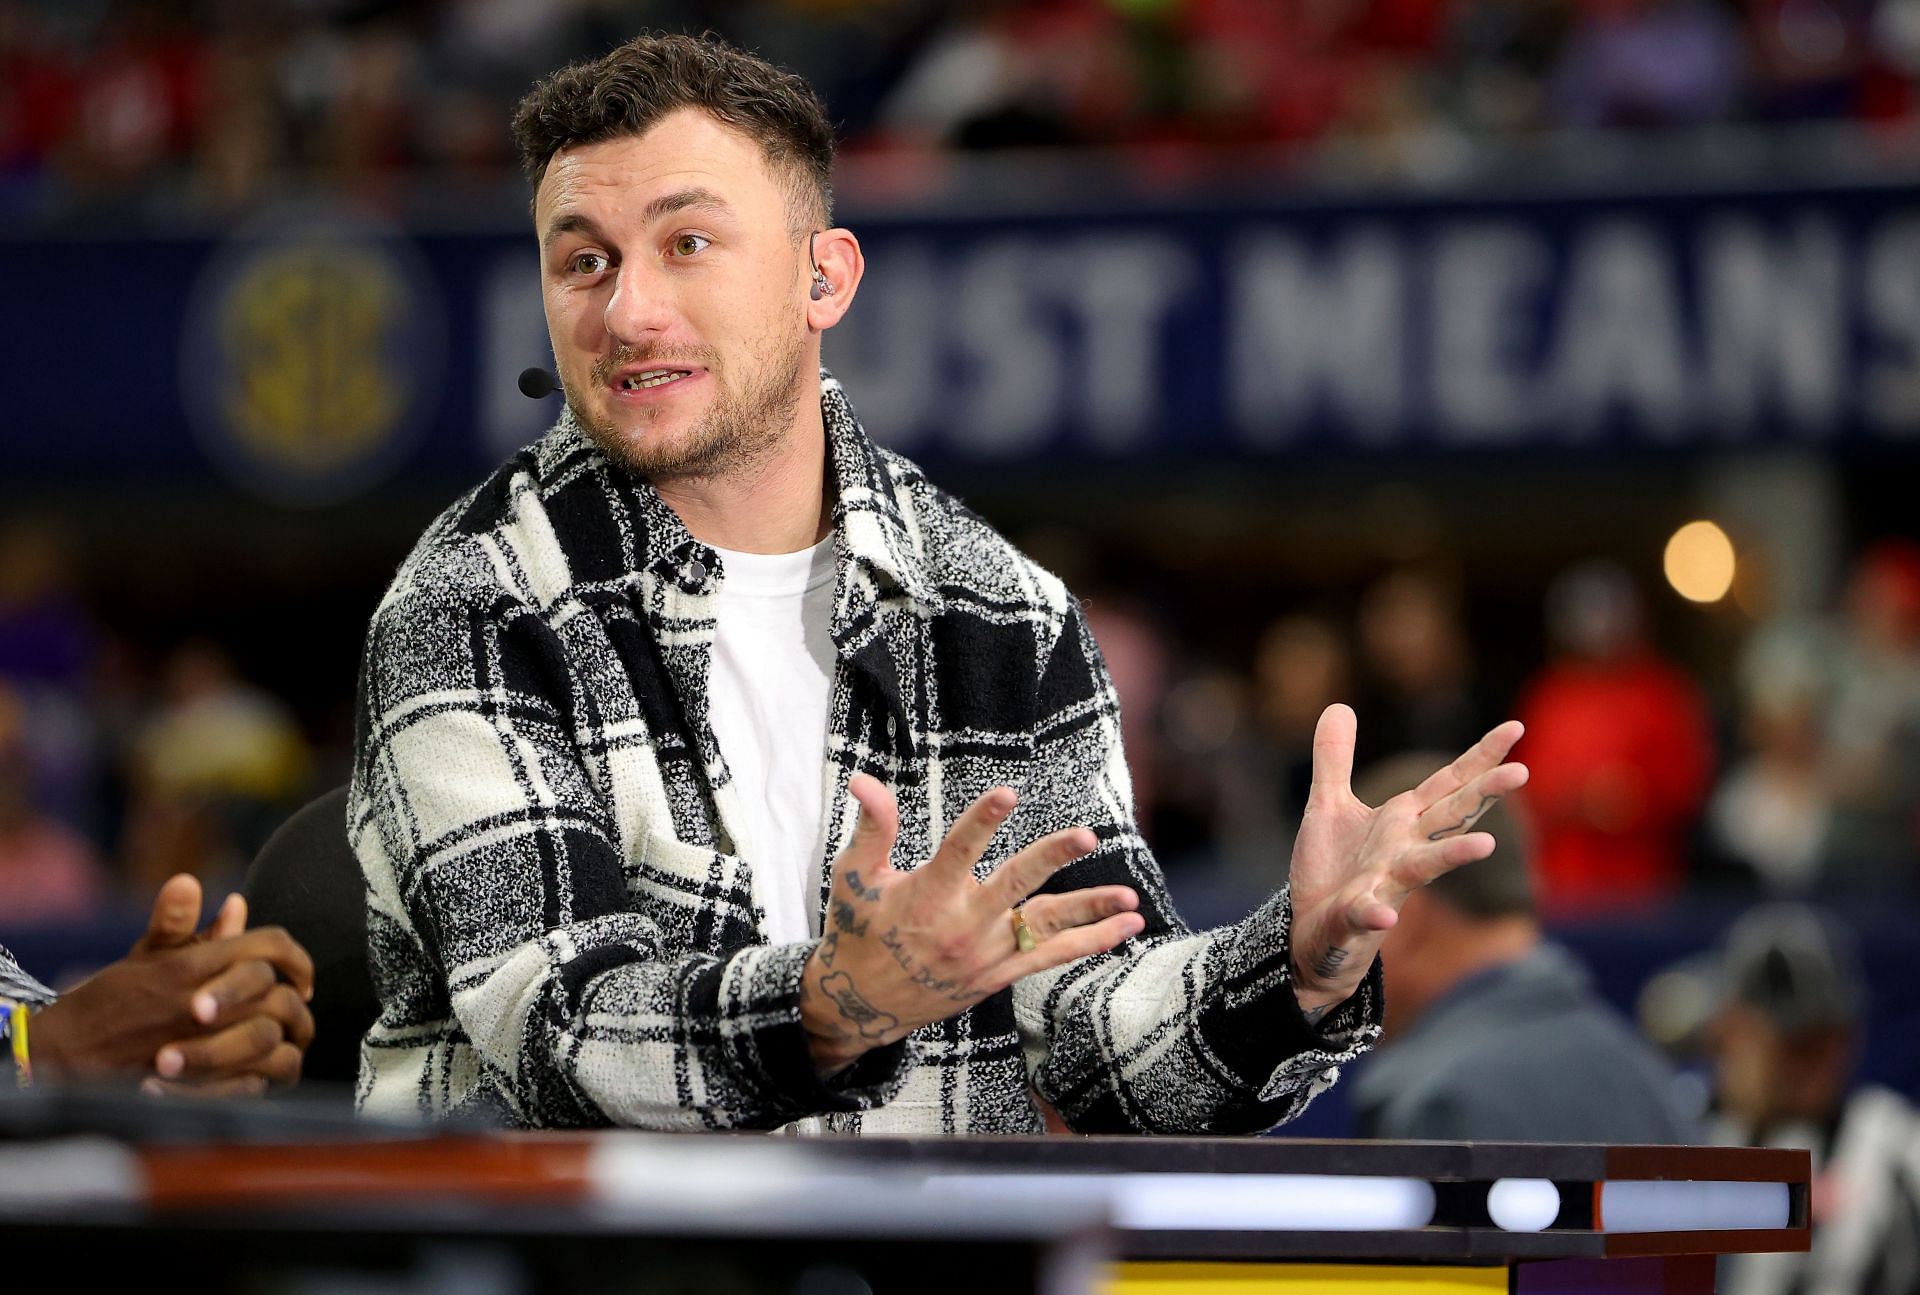 Johnny Manziel flamed out of the NFL